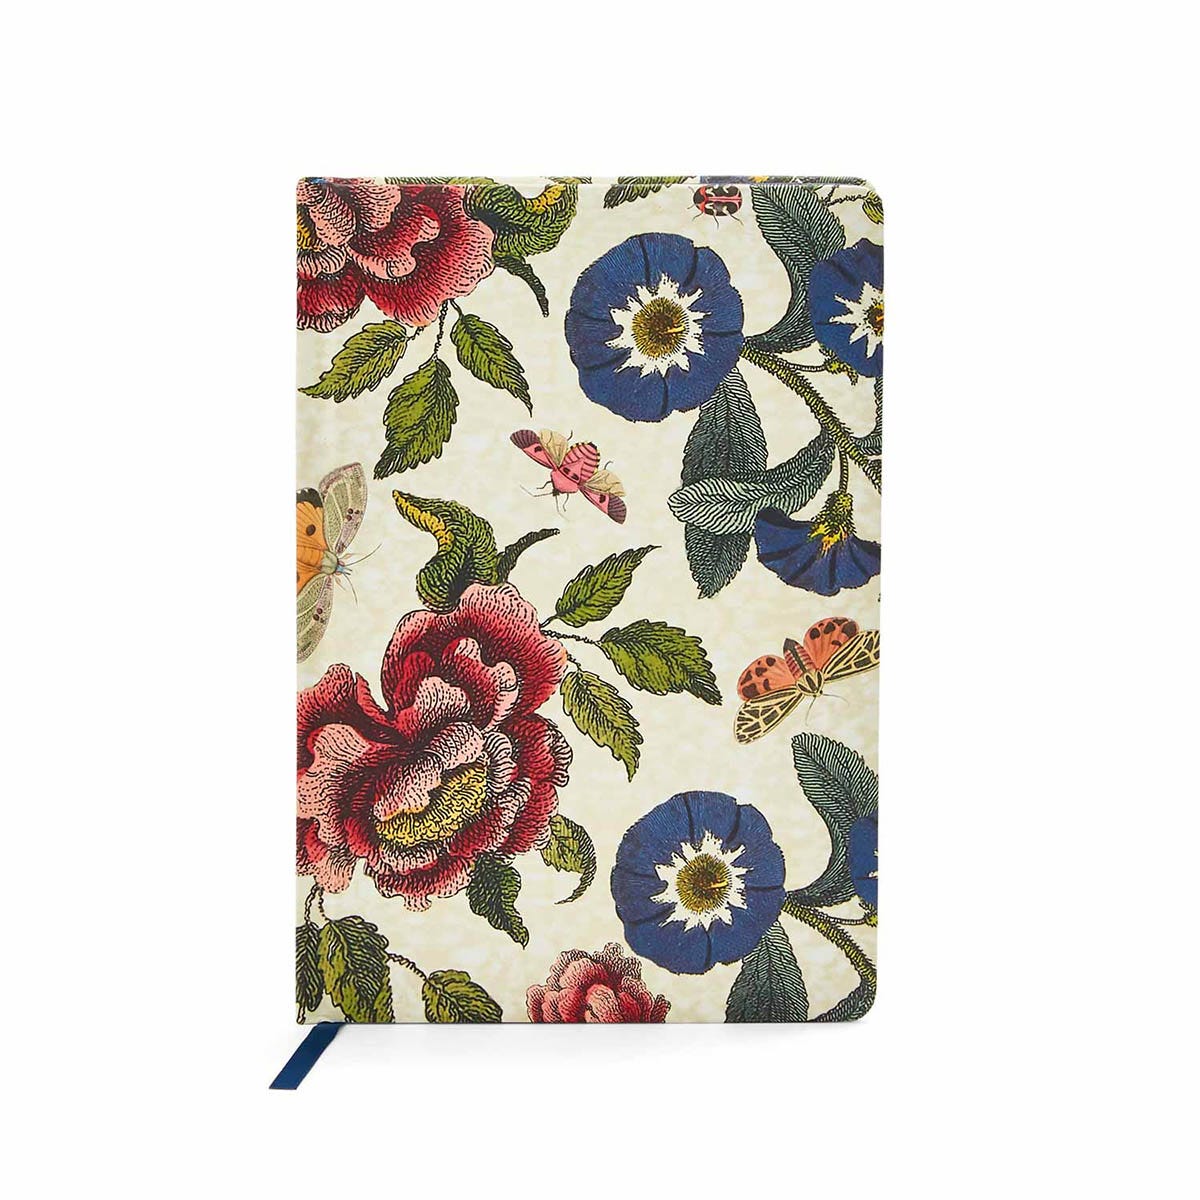 Creatures of Curiosity Floral Notebook